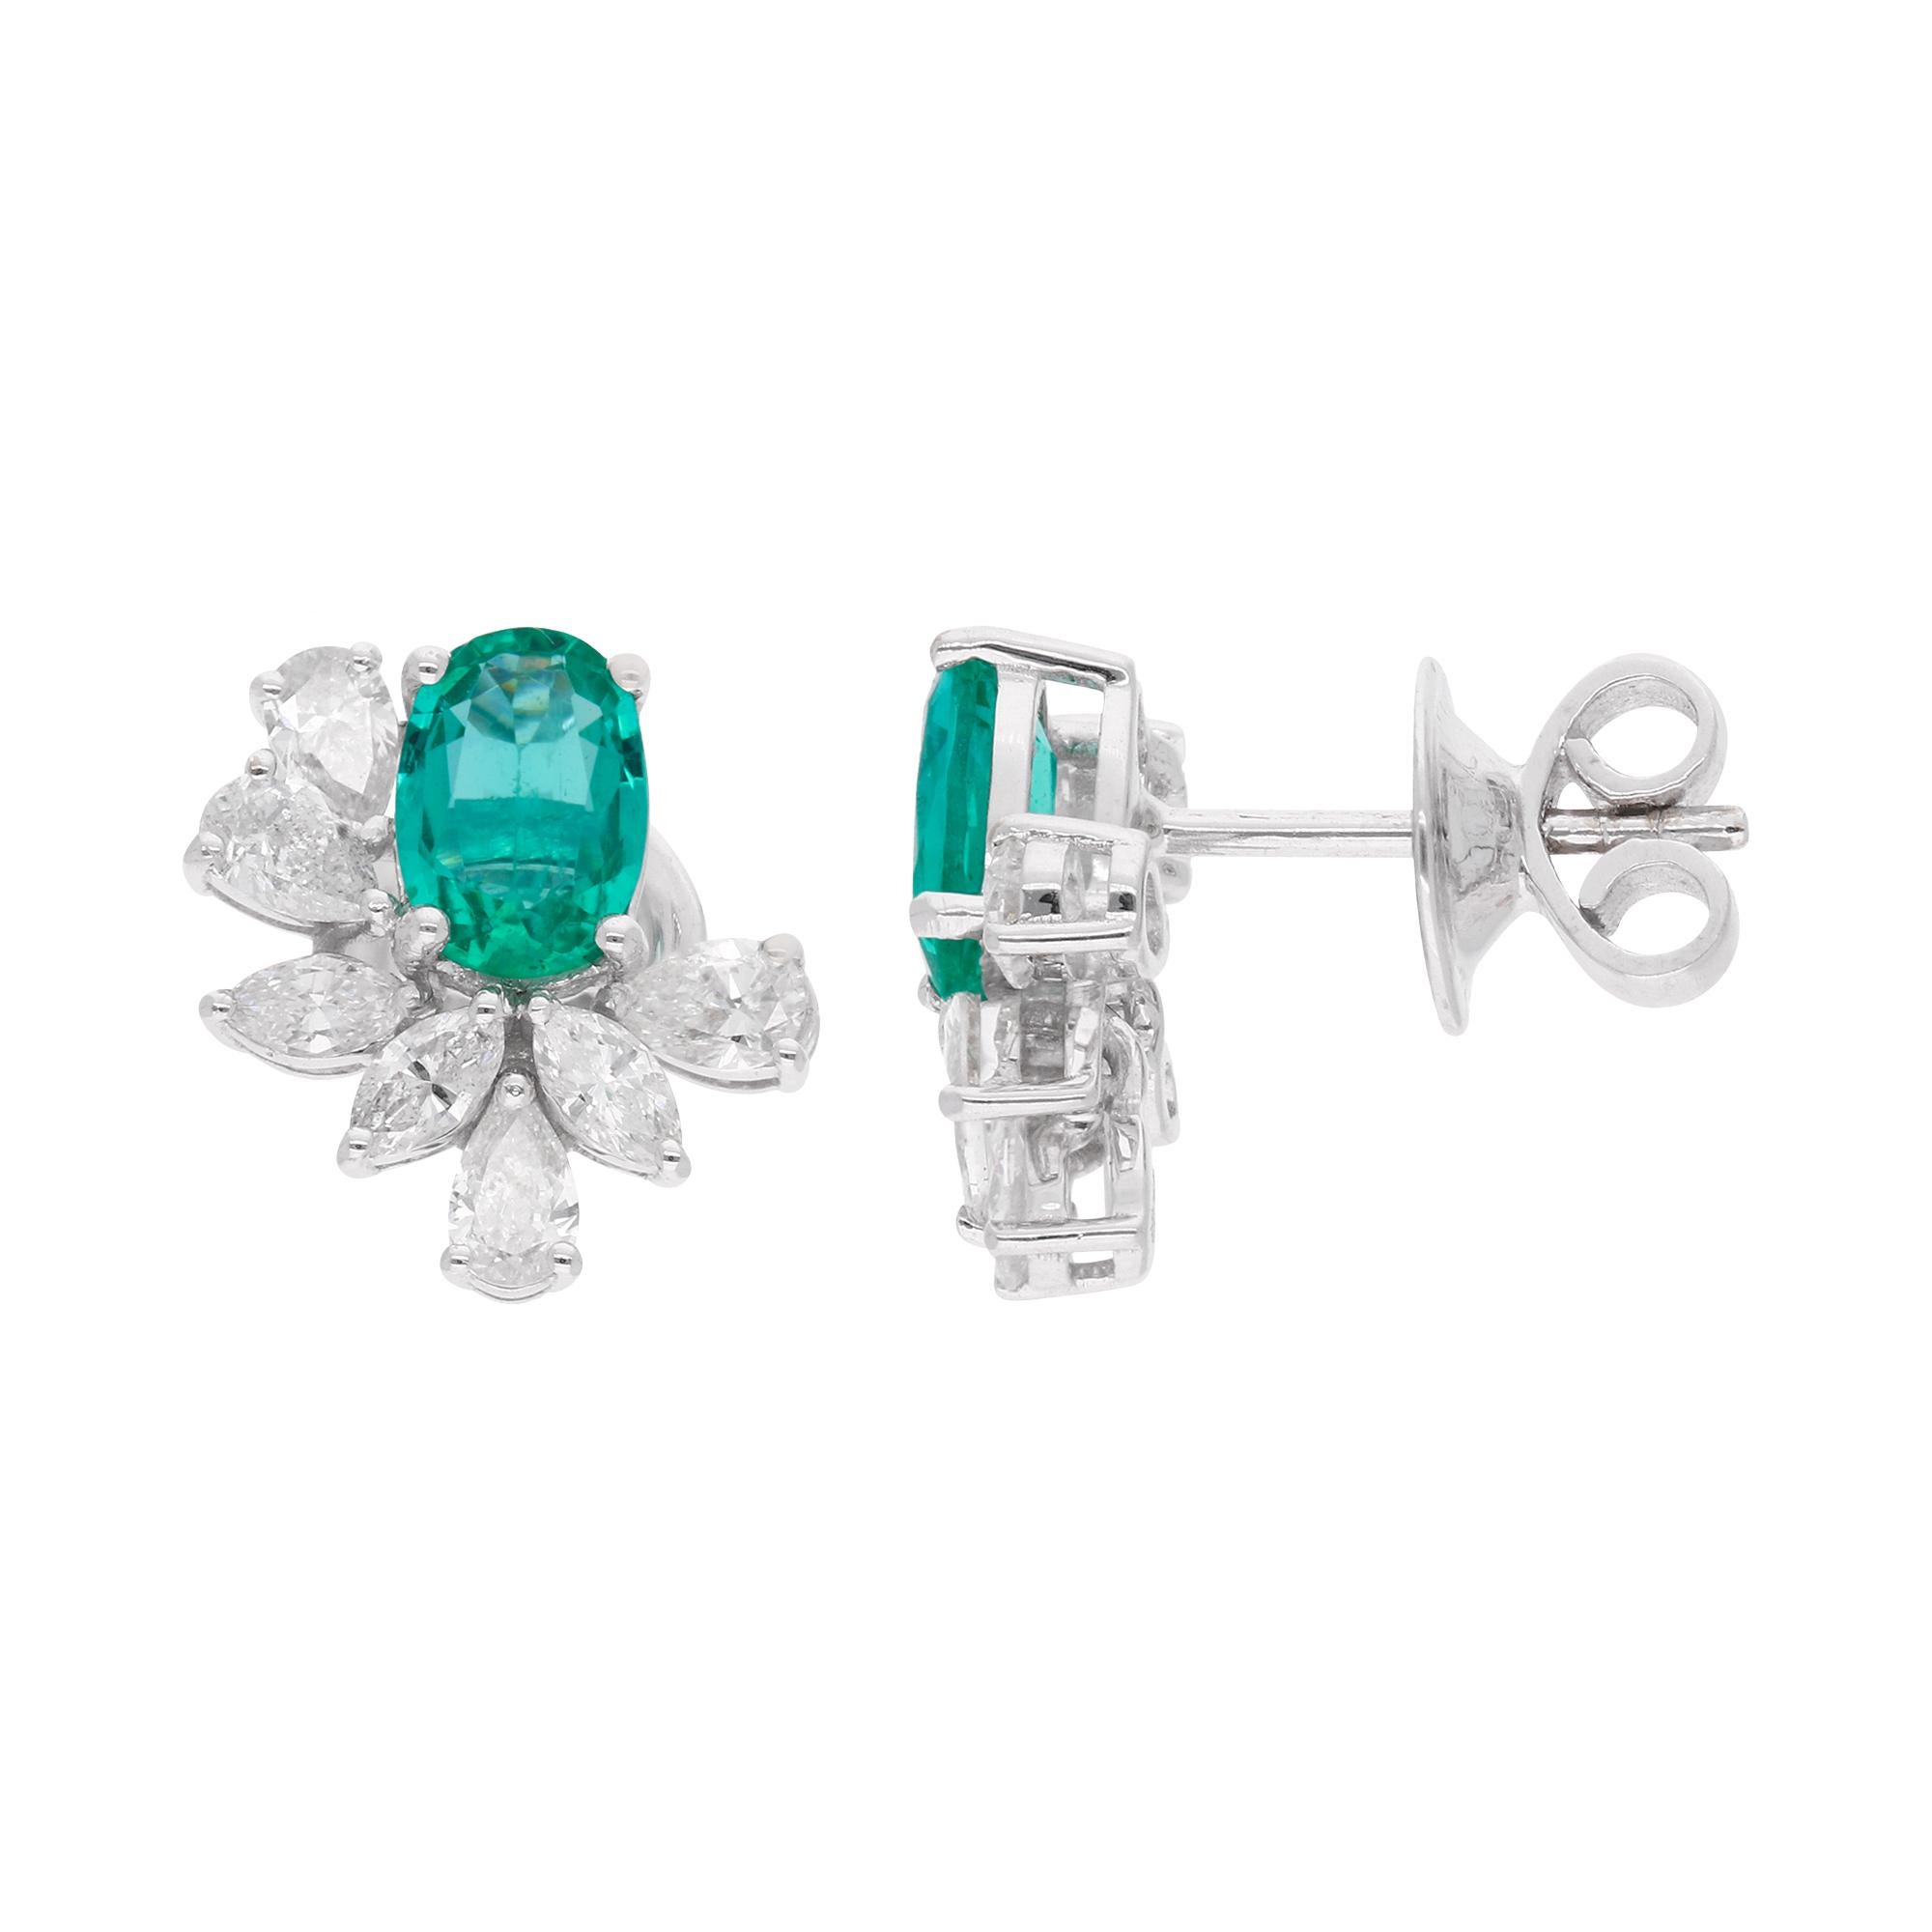 Item Code :- SEE-13341
Gross Wt. :- 4.16 gm
Solid 18k White Gold Wt. :- 3.68 gm
Natural Diamond Wt. :- 1.18 Ct. ( AVERAGE DIAMOND CLARITY SI1-SI2 & COLOR H-I )
Natural Emerald Wt. :- 1.22 Ct.
Earrings Size :- 14 mm approx.

✦